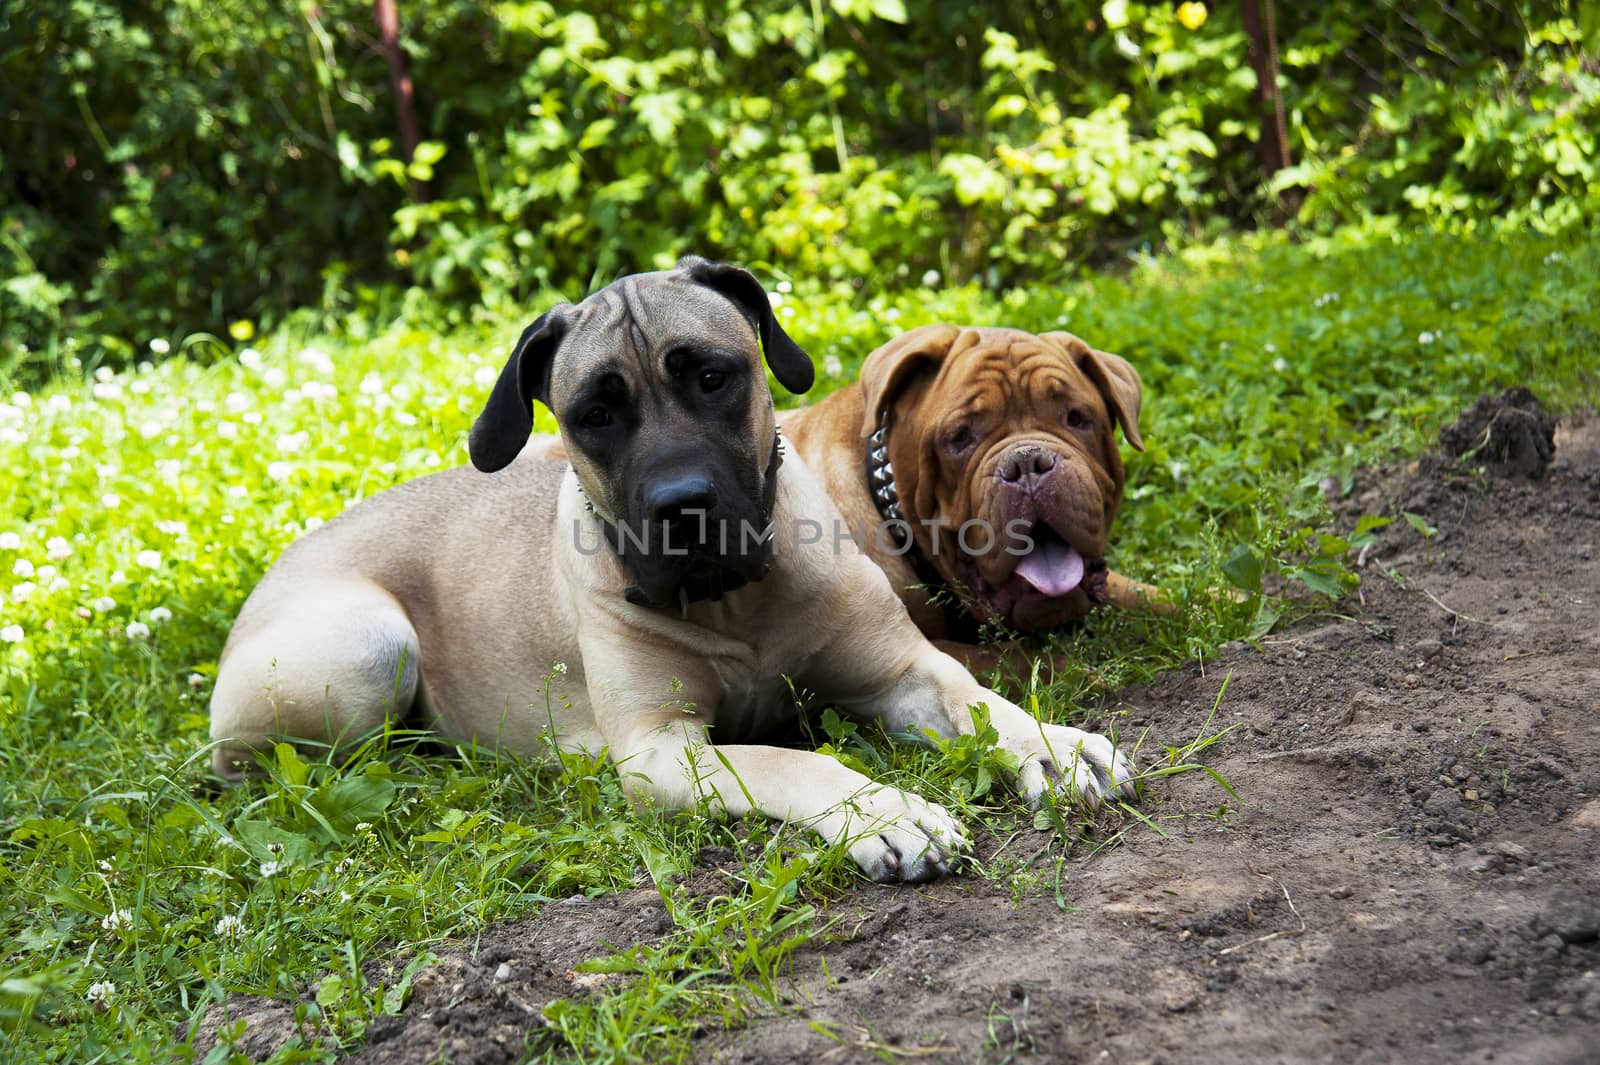 two dogs on the grass by raduga21